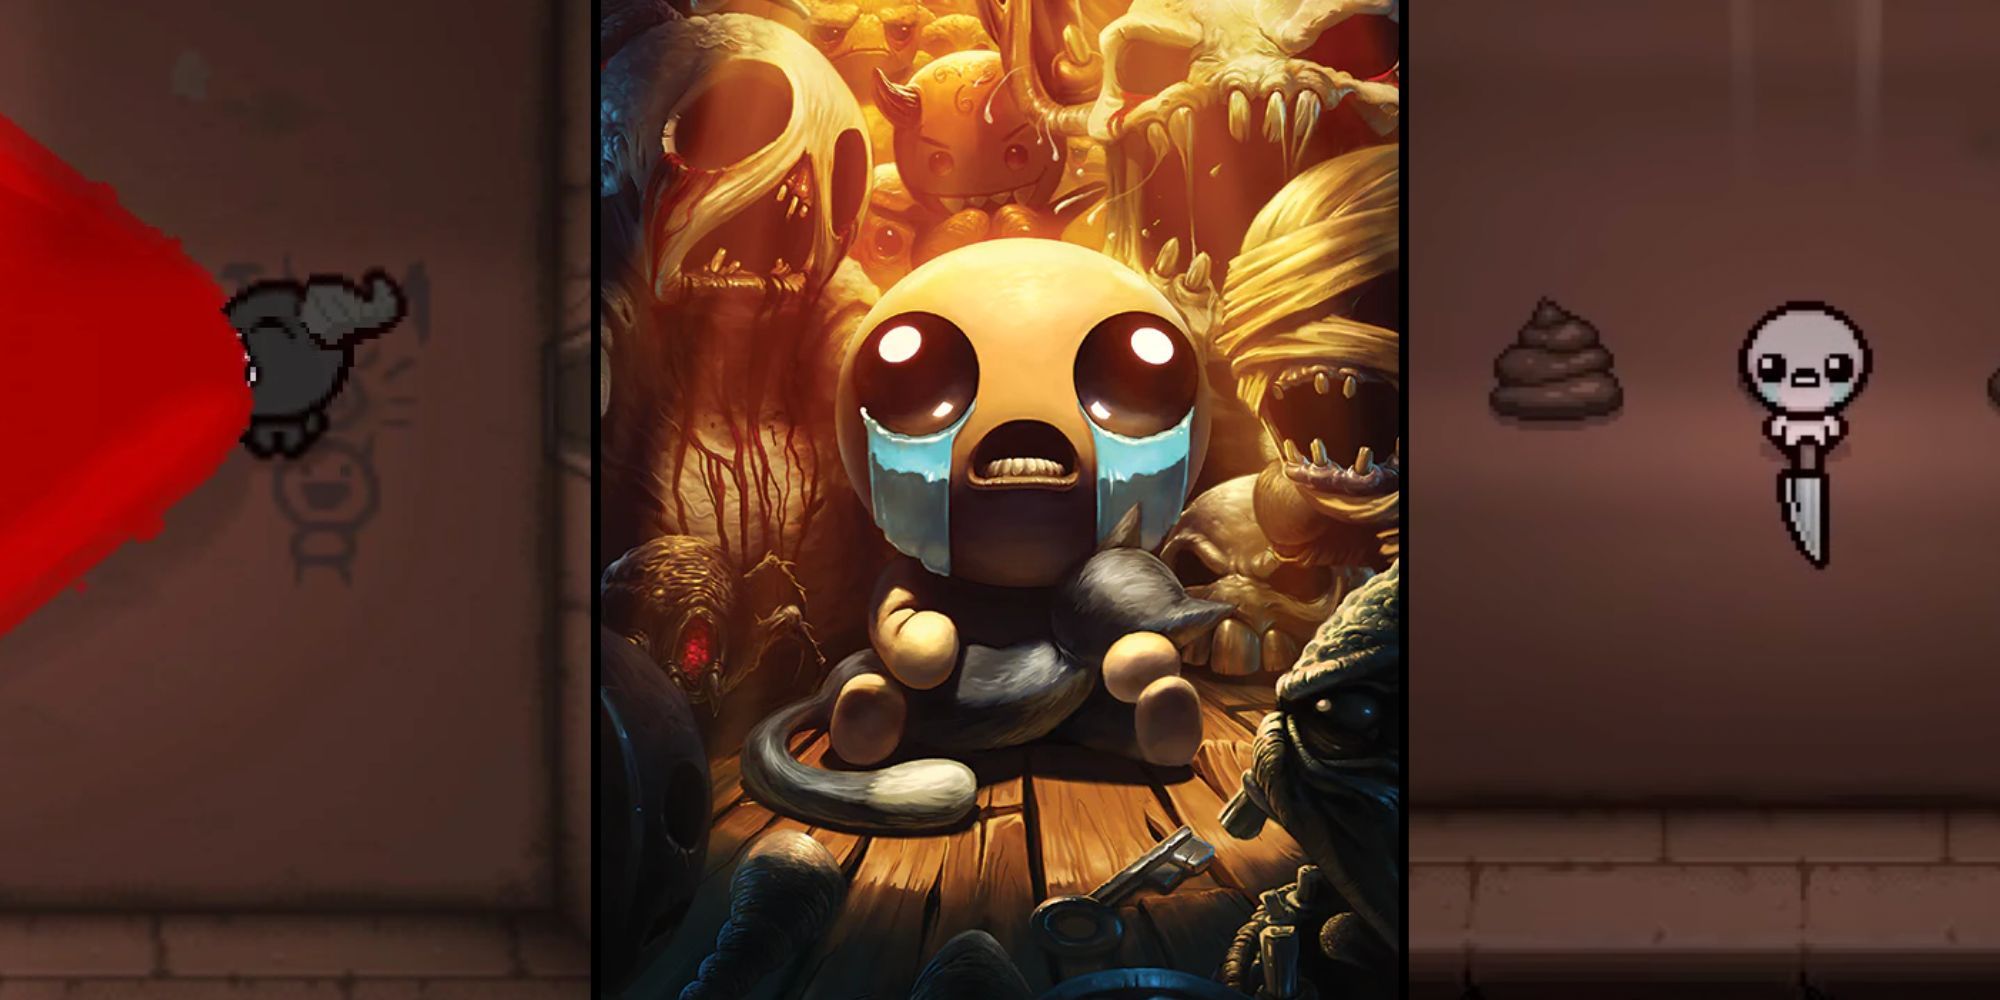 Best Devil Items in The Binding of Isaac